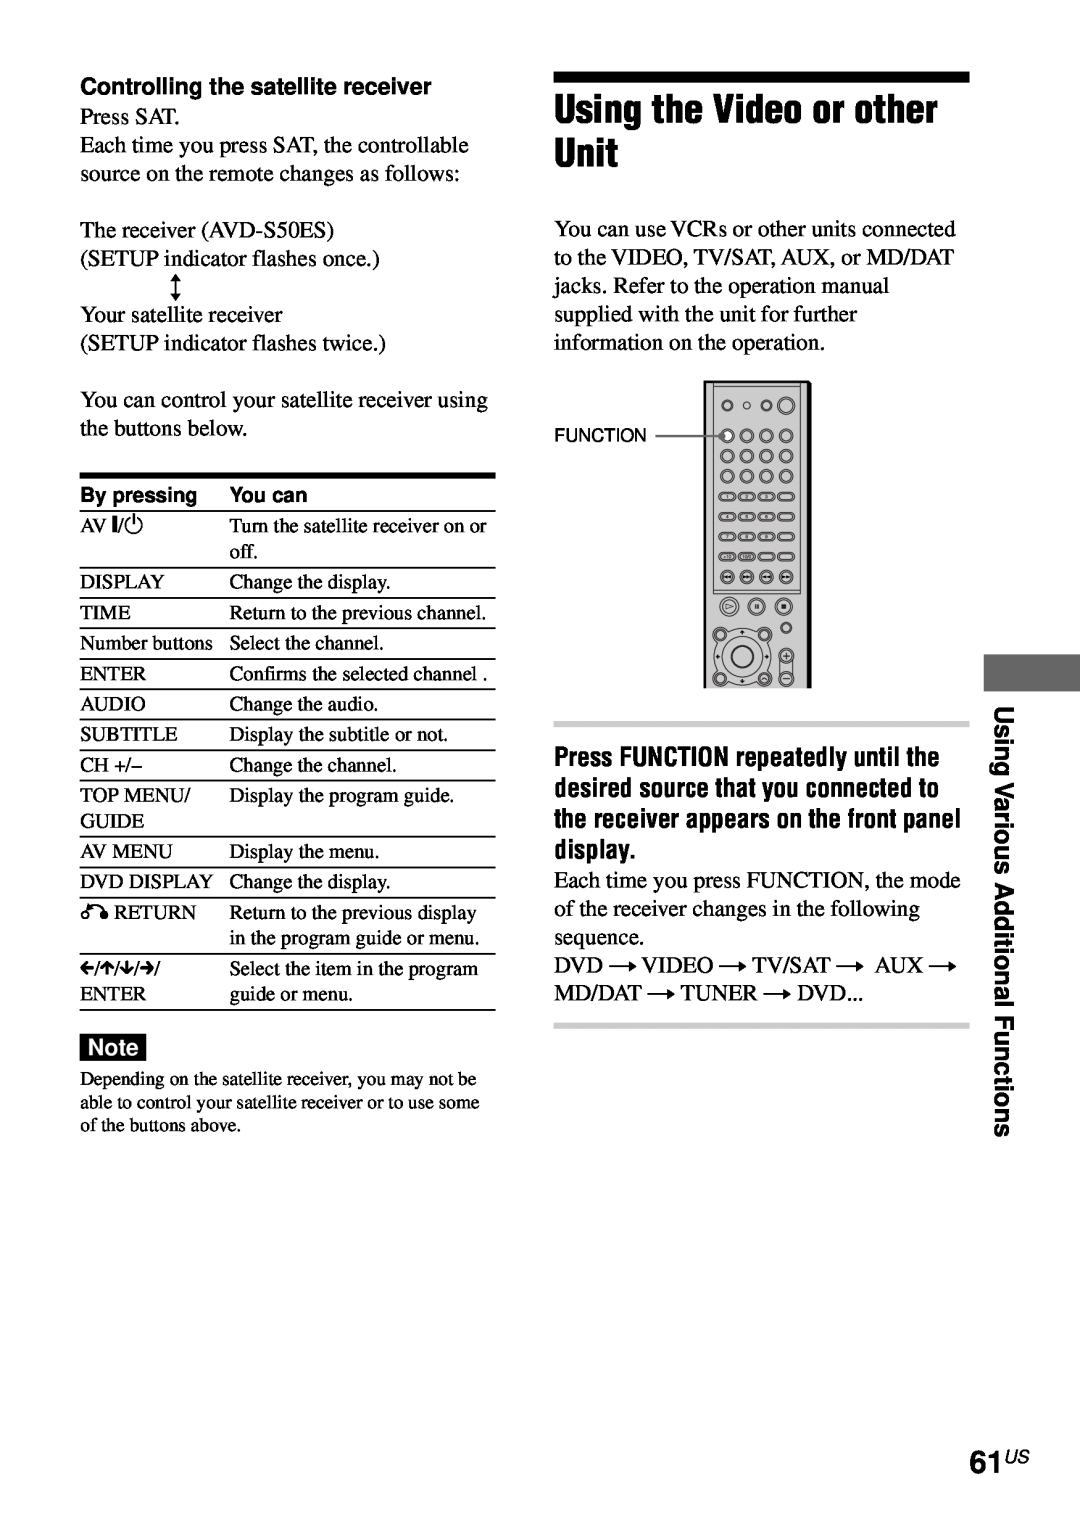 Sony AVD-S50ES operating instructions Using the Video or other Unit, 61US, display, Controlling the satellite receiver 